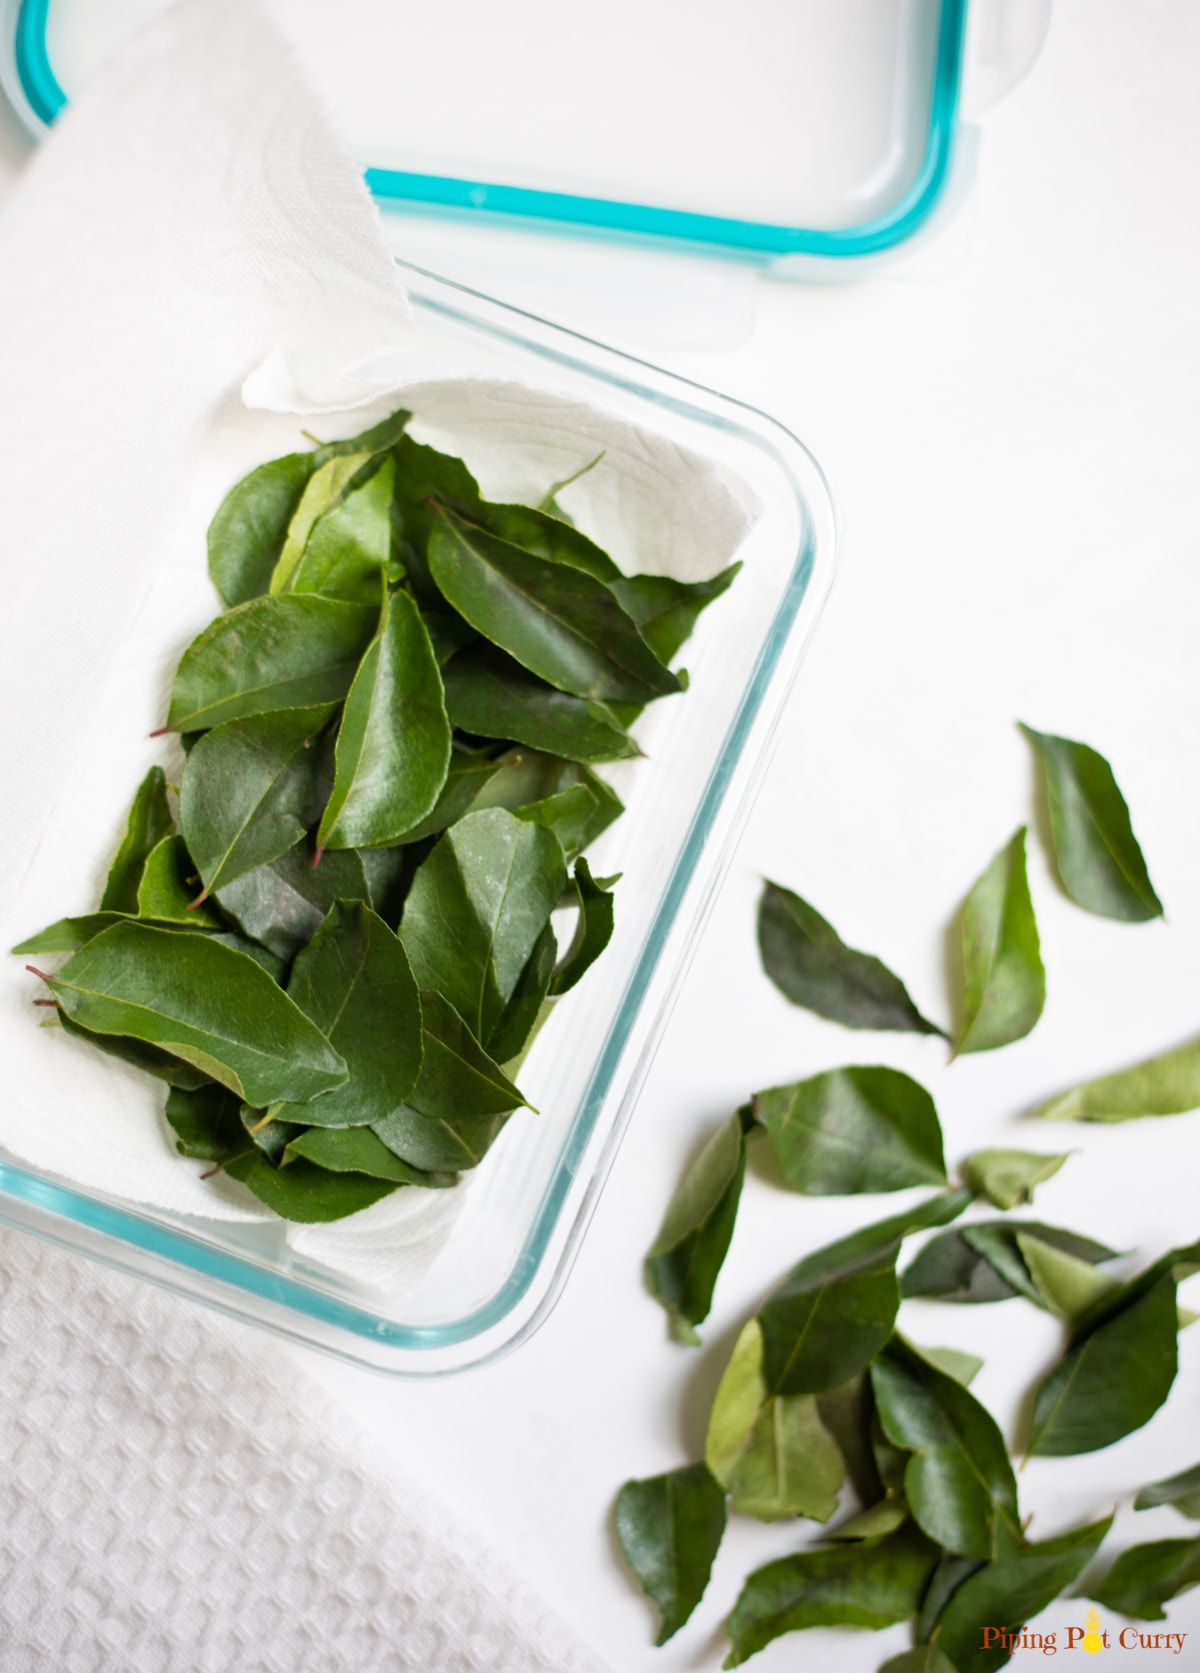 Aromatic Curry Leaves - How to Buy, Use & Store? - Piping Pot Curry